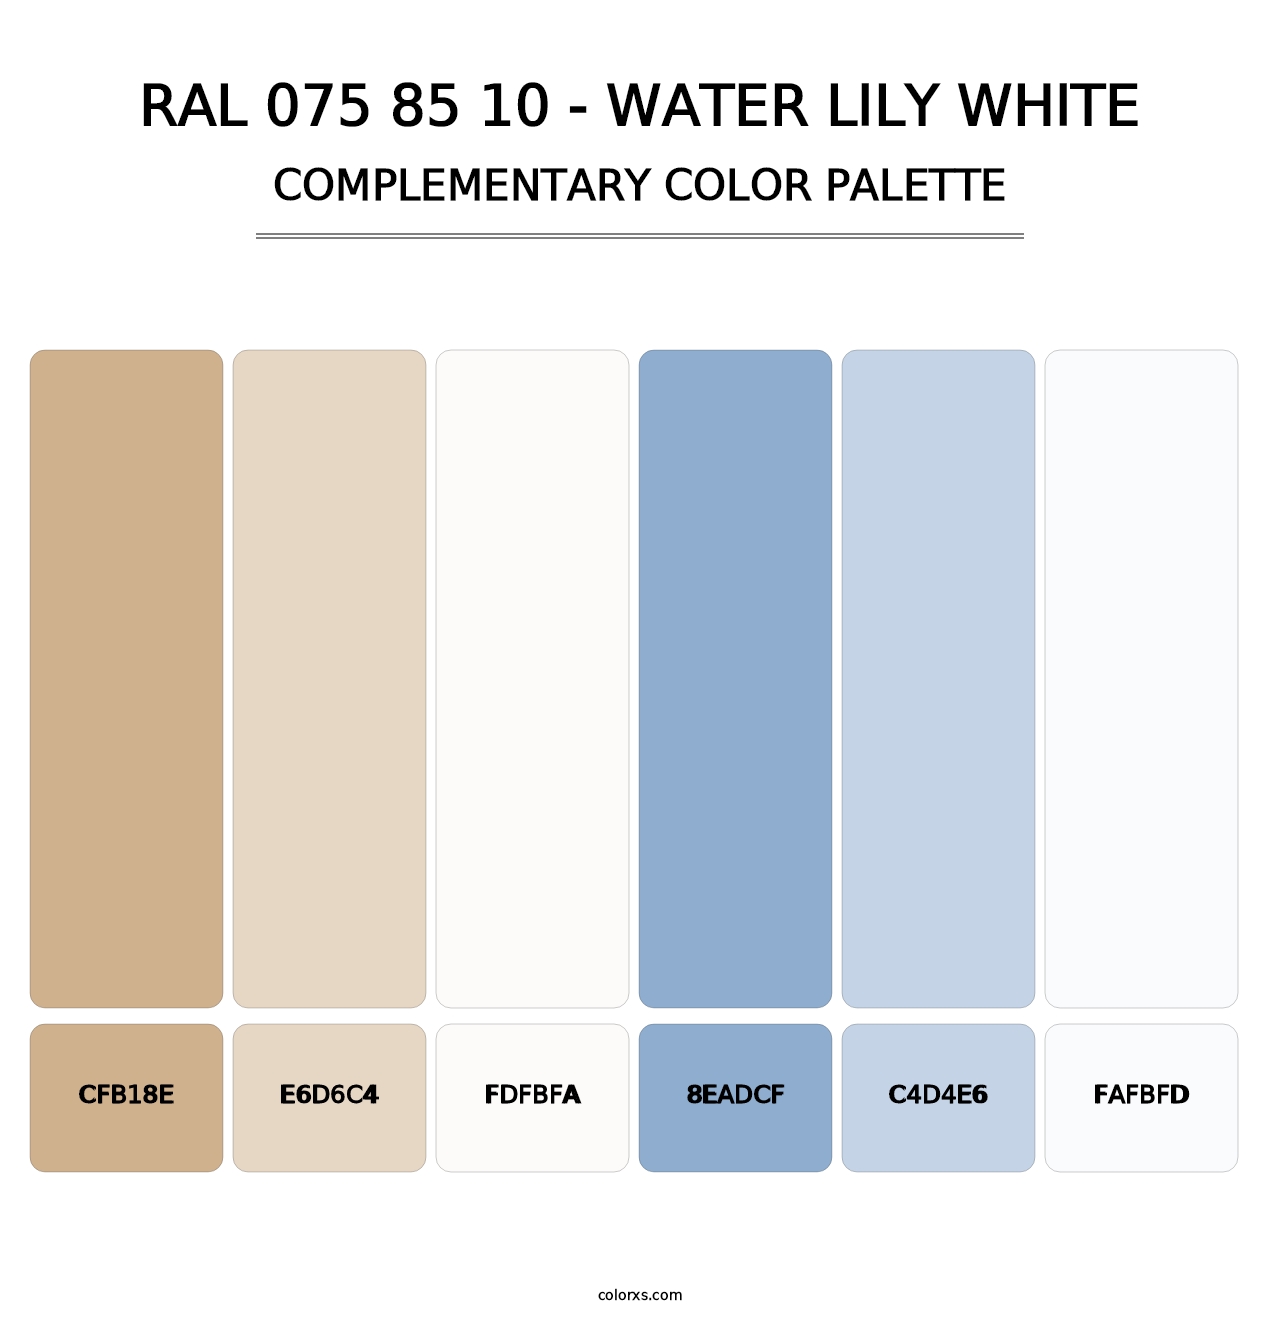 RAL 075 85 10 - Water Lily White - Complementary Color Palette